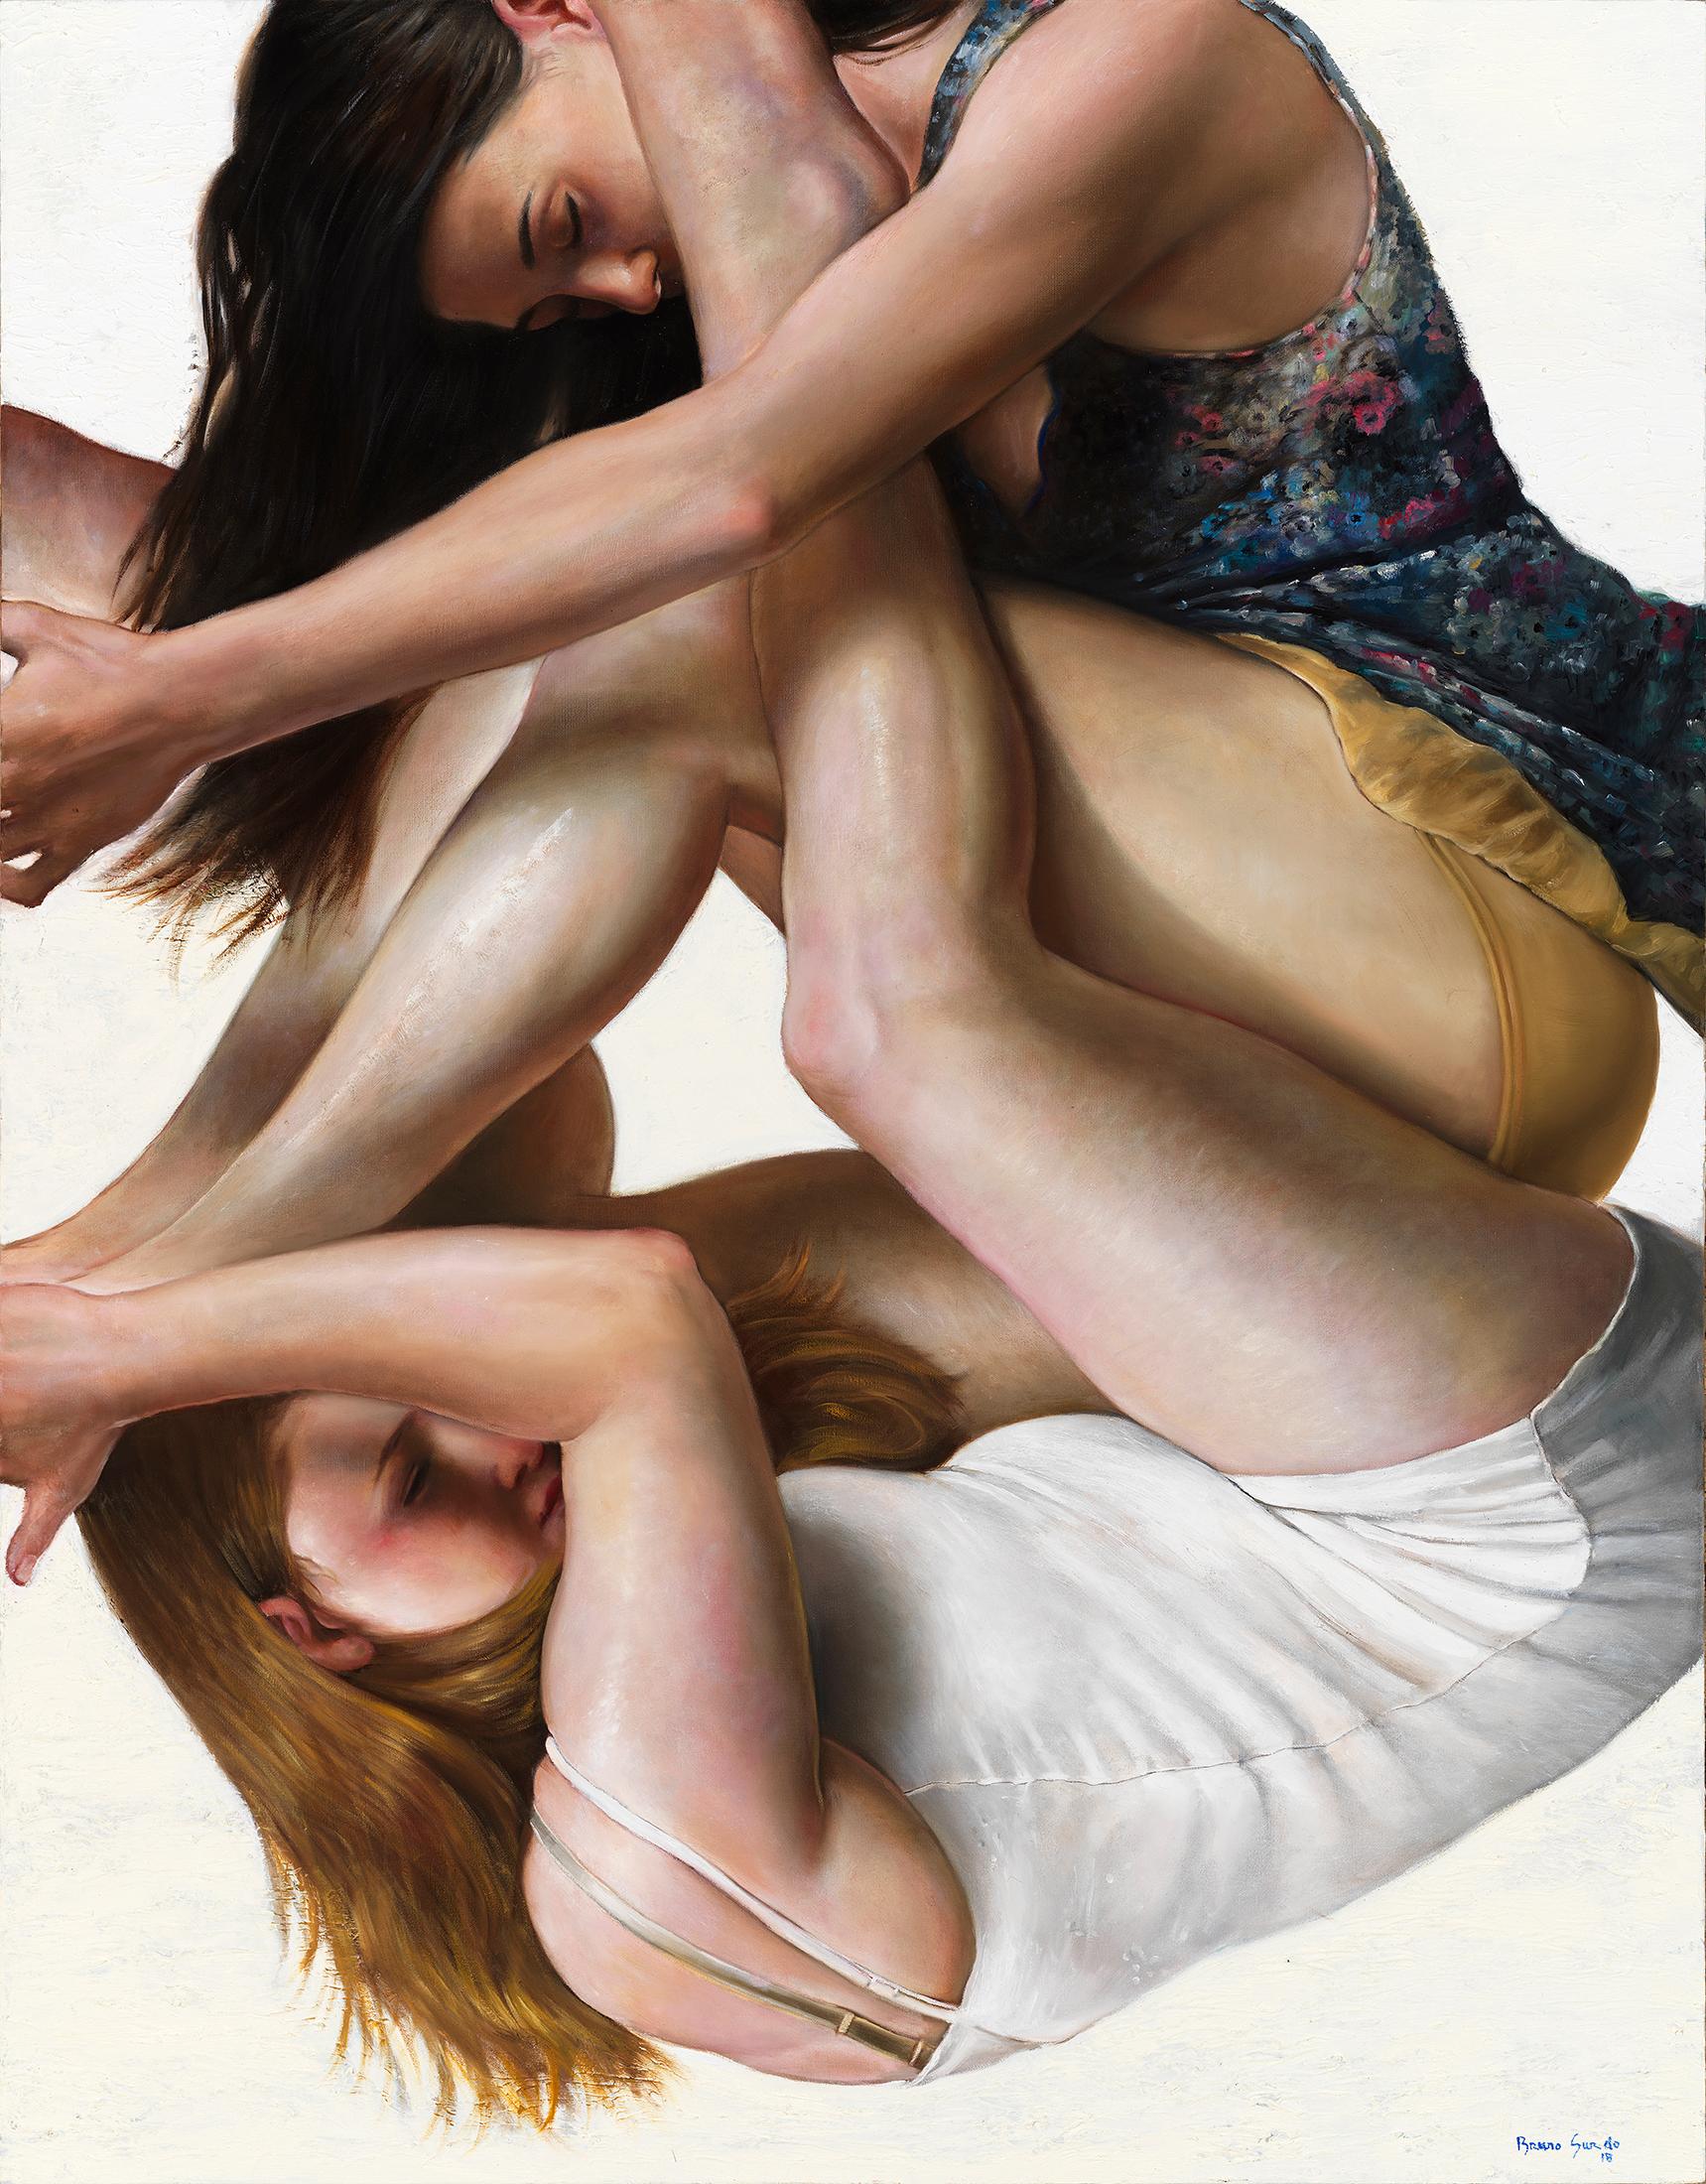 Bruno Surdo Figurative Painting - Entanglement - Original Oil Painting of Intertwined Female Figures Floating